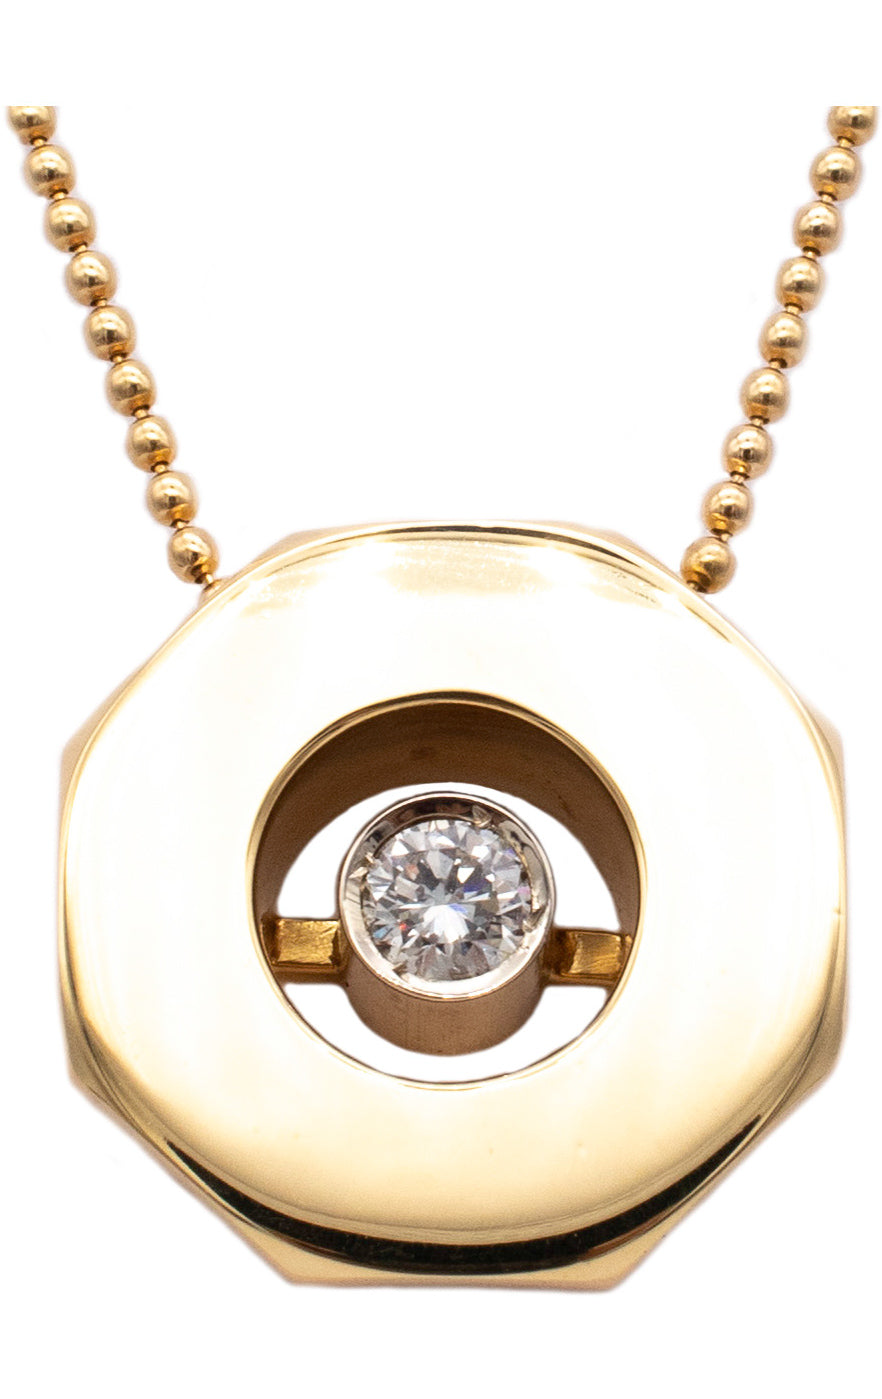 Pierre Cardin 1970 Paris geometric necklace in 18 kt yellow gold with –  Treasure Fine Jewelry